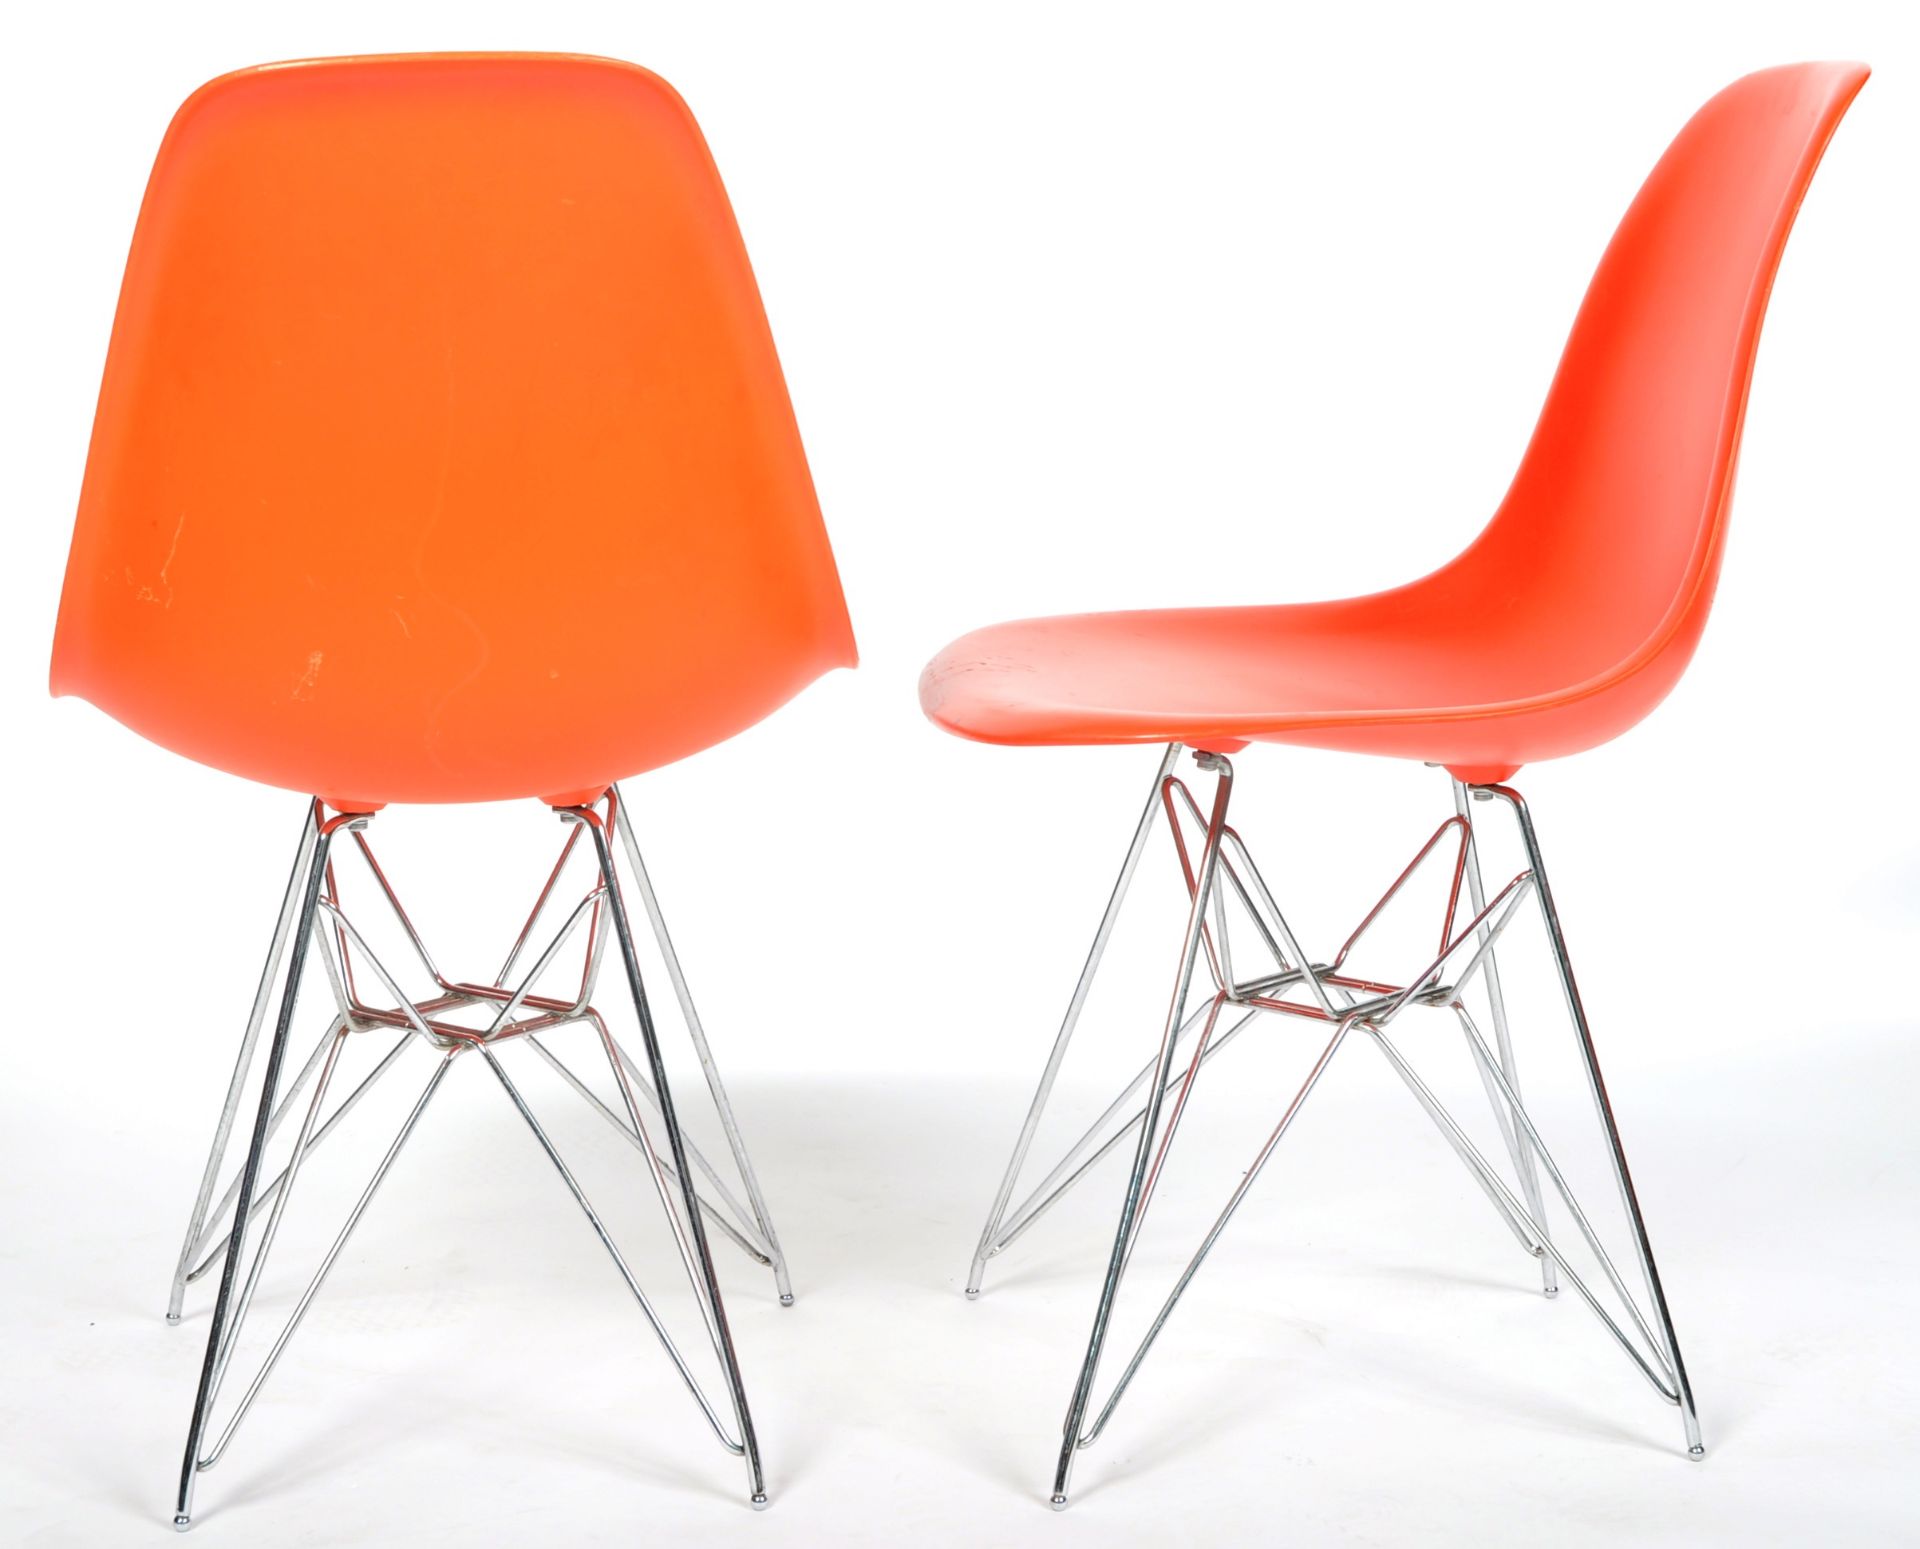 CHARLES & RAY EAMES FOR VITRA - SET OF SIX DSR EAMES PLASTIC CHAIRS - Image 9 of 10